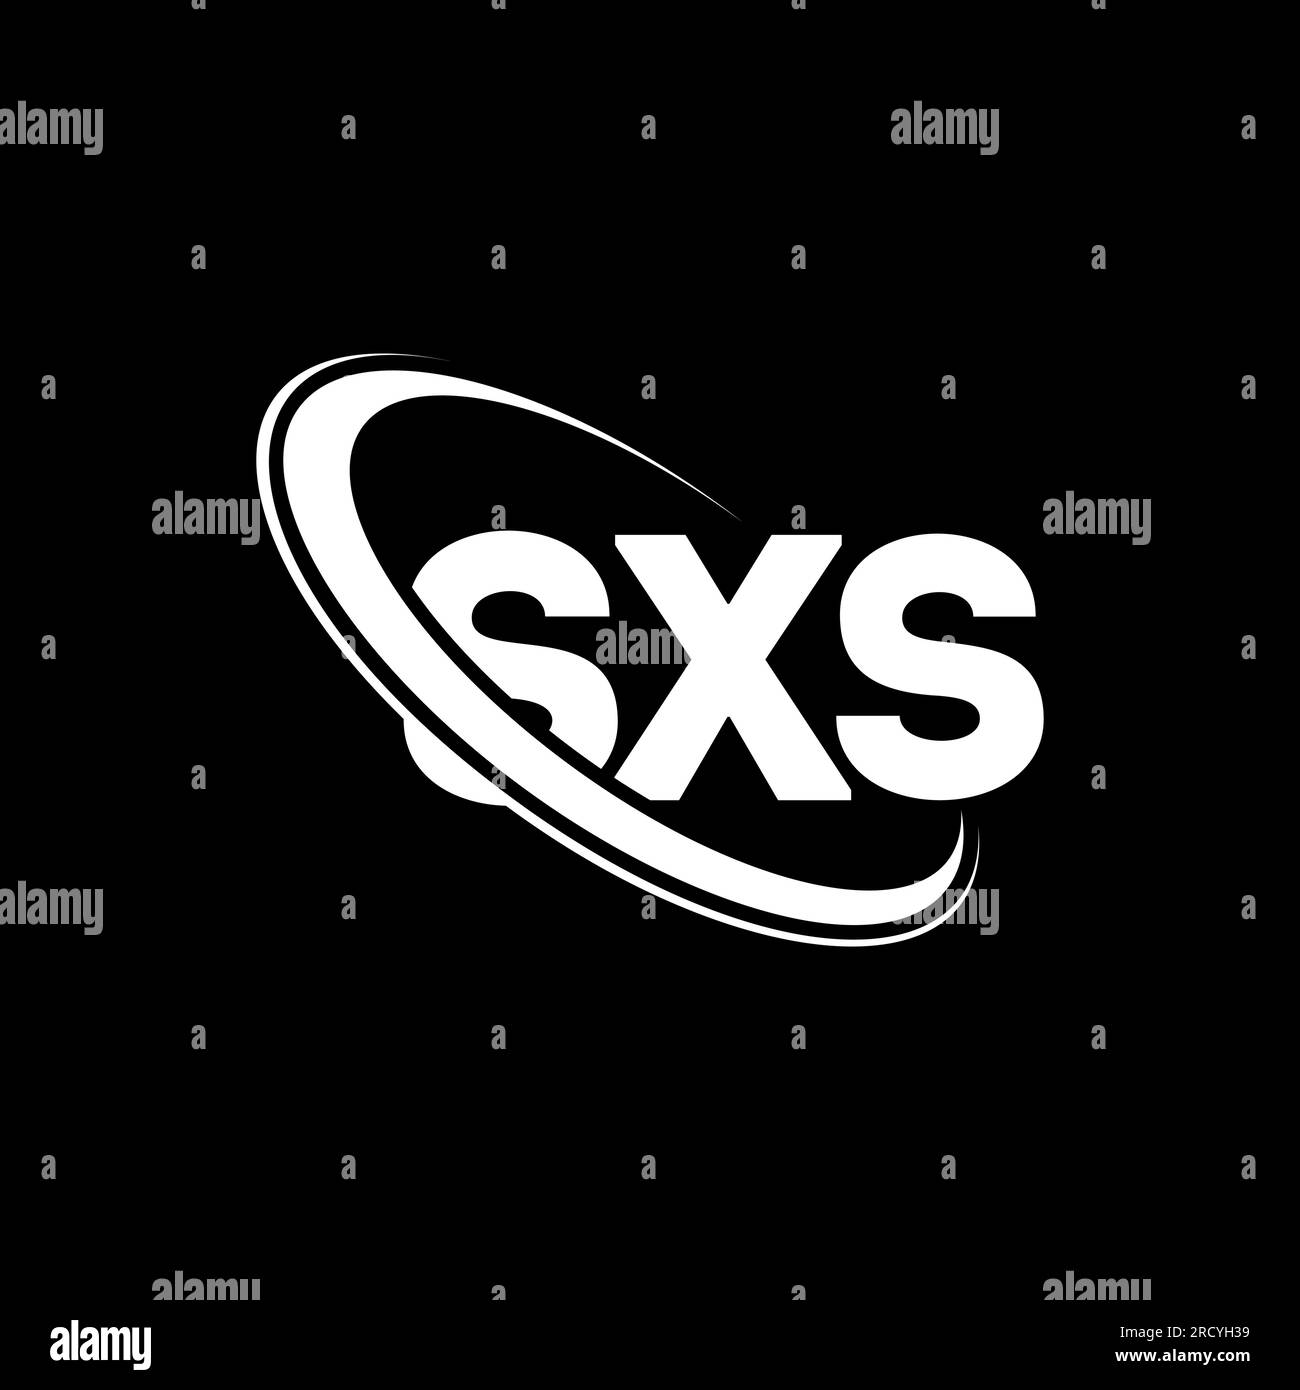 Sxs Stock Vector Images - Alamy